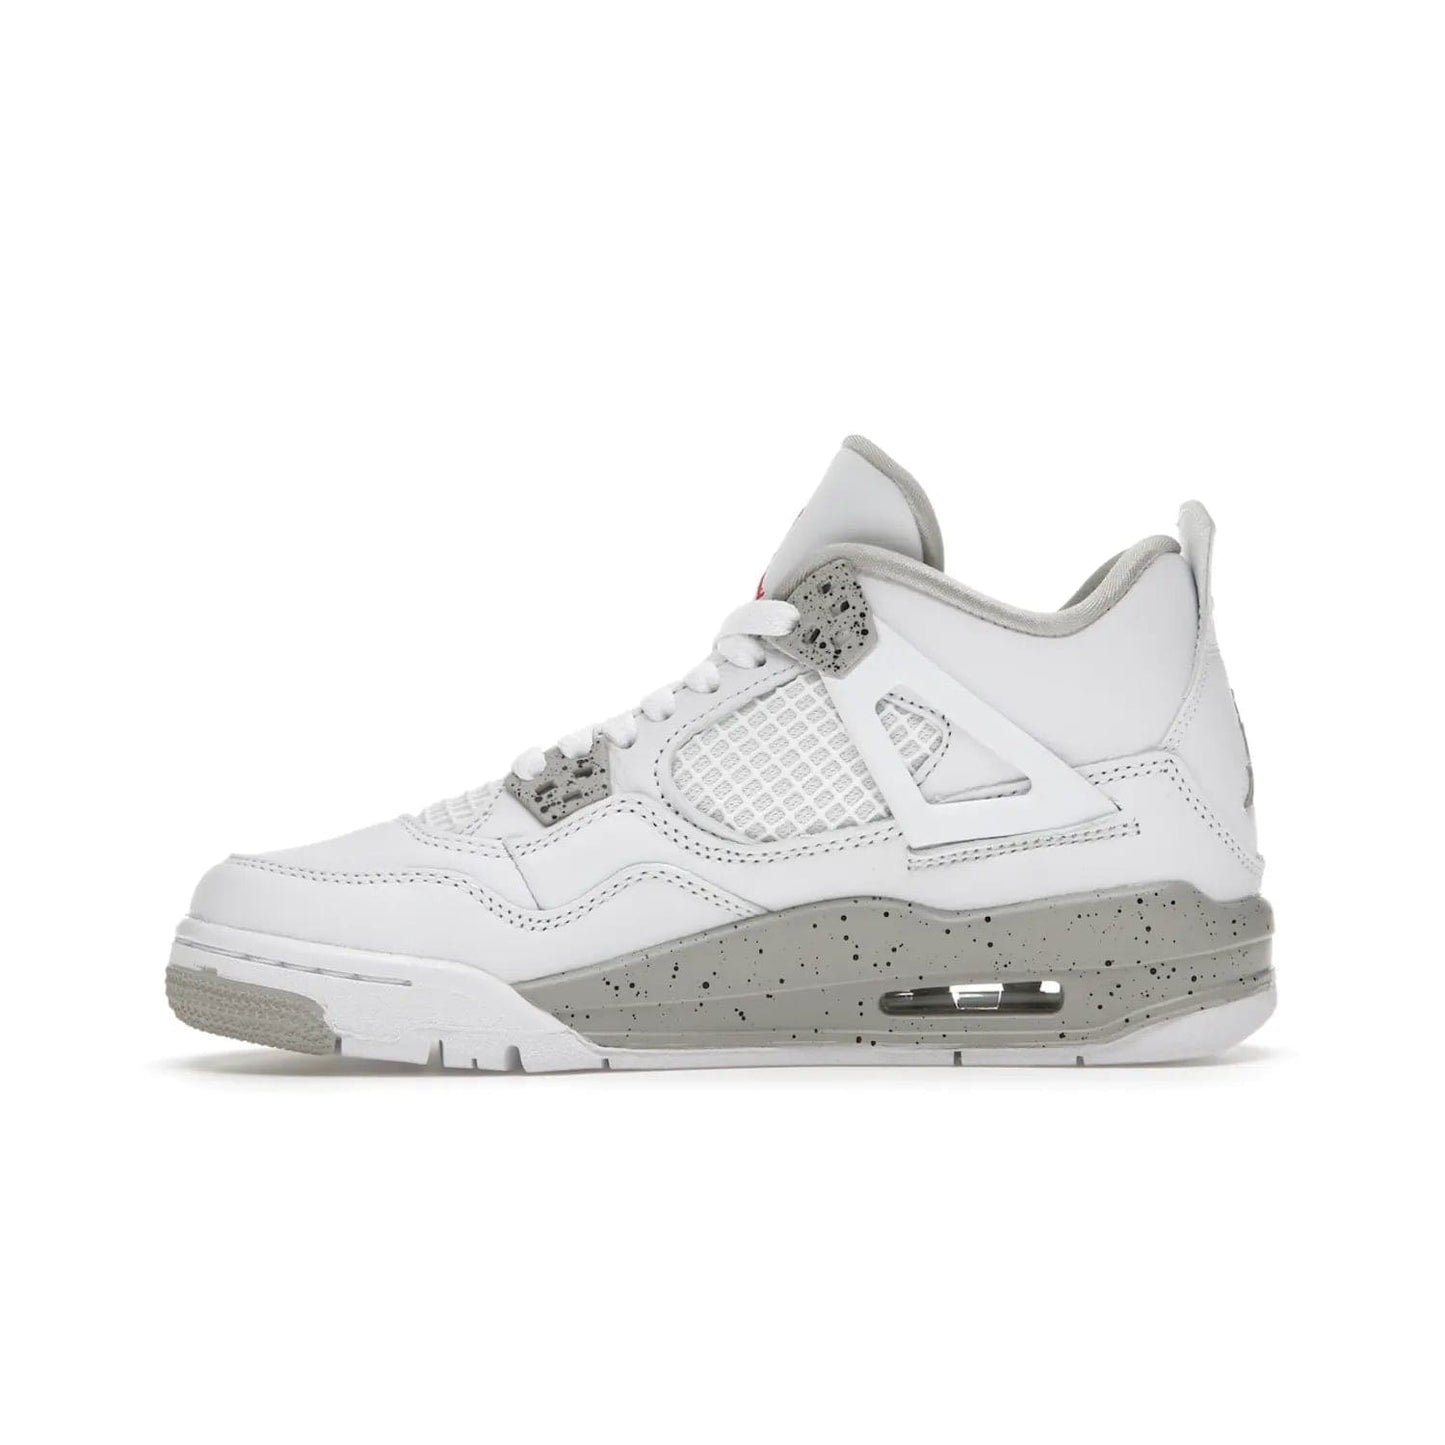 Jordan 4 Retro White Oreo (2021) (GS) - Image 19 - Only at www.BallersClubKickz.com - White Oreo Air Jordan 4 Retro 2021 GS - Iconic sneaker silhouette with white canvas upper, Tech Grey detailing, and Fire Red accents. Available July 2021.